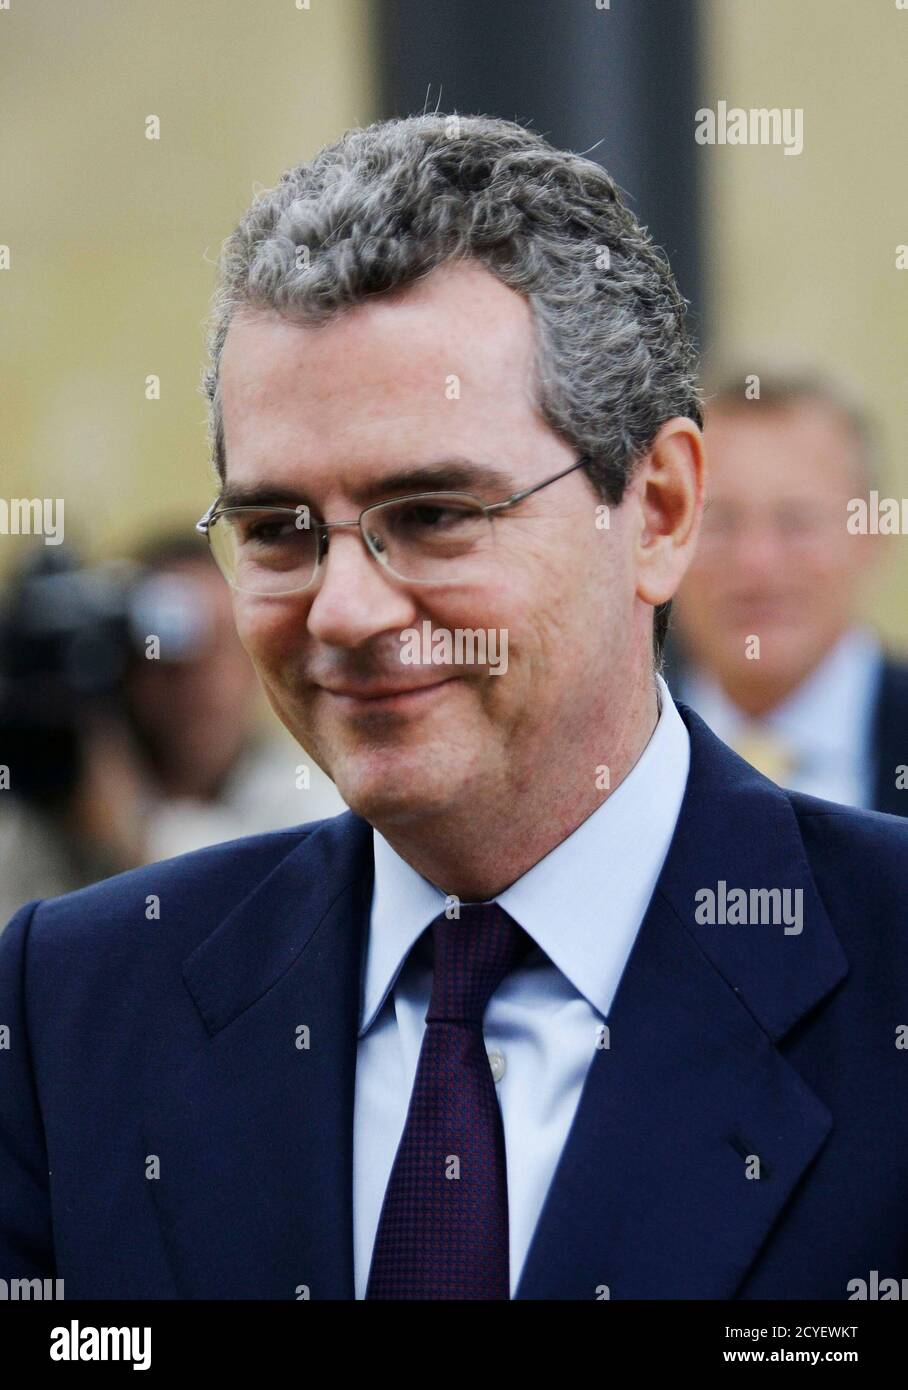 Inditex's new president Pablo Isla arrives at Zara factory, the  headquarters of Inditex group in Arteixo for the shareholders general  meeting in northern Spain, July 19, 2011. Amancio Ortego, Spain's richest  man